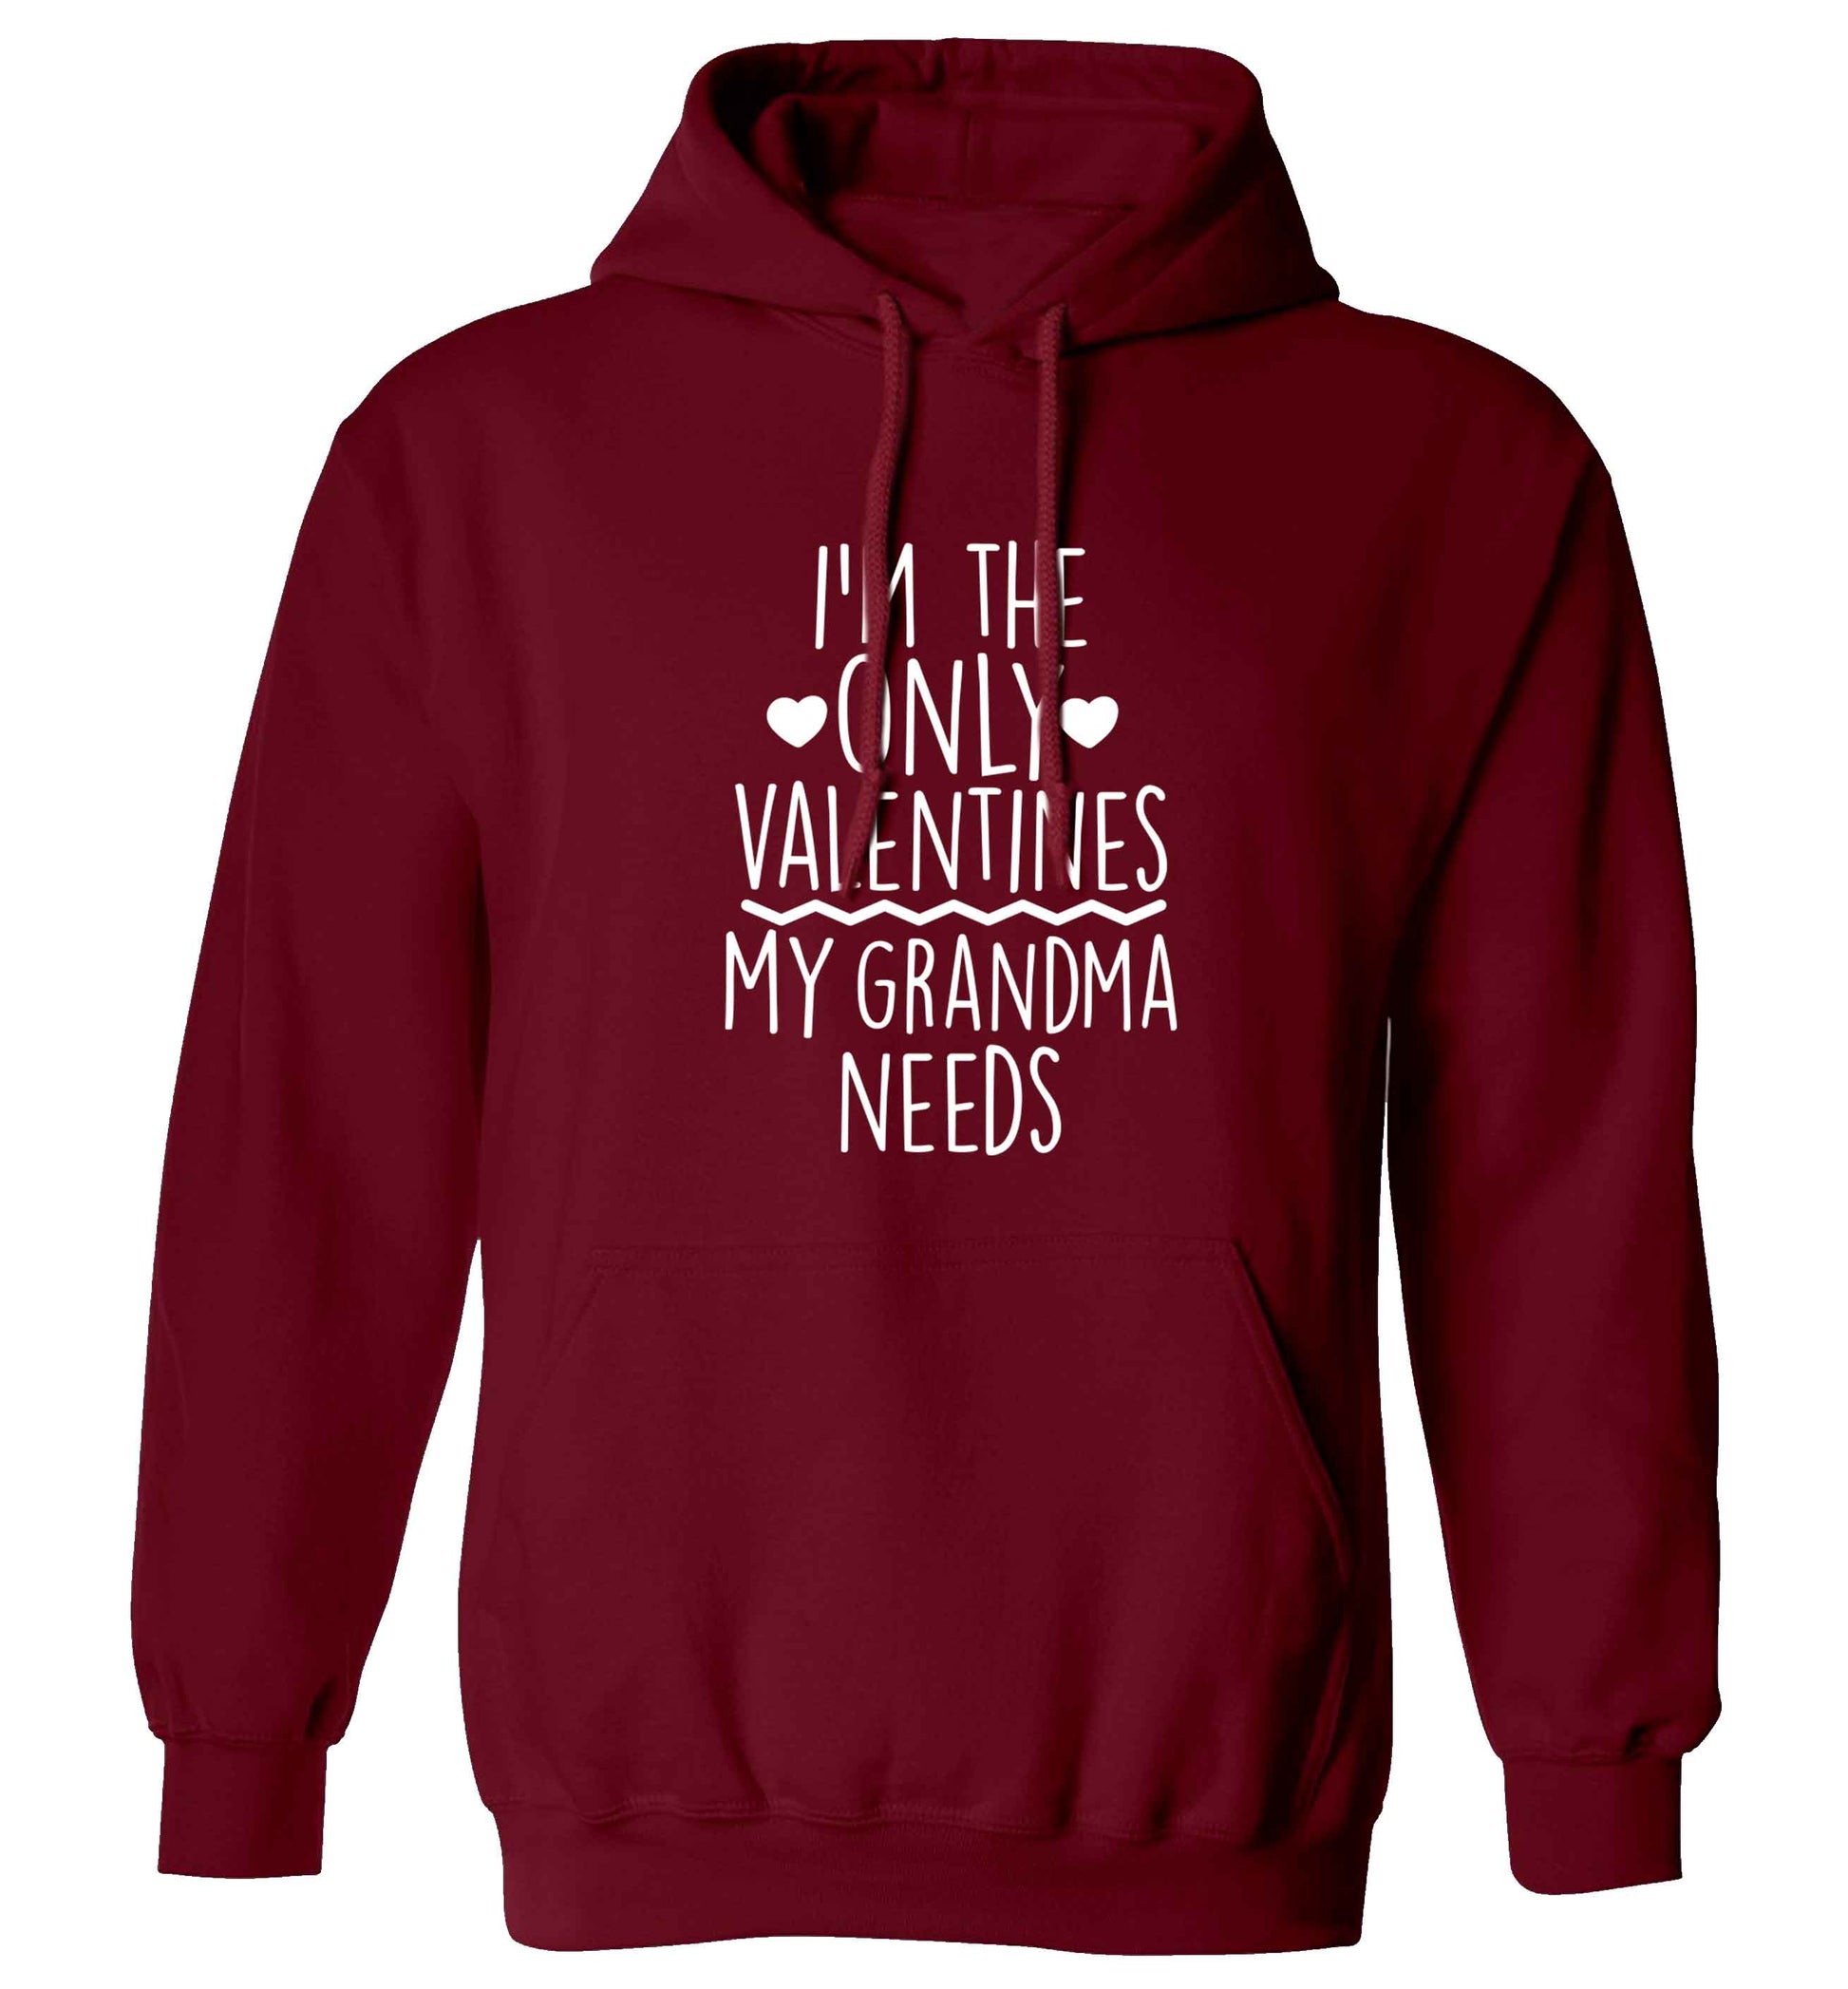 I'm the only valentines my grandma needs adults unisex maroon hoodie 2XL